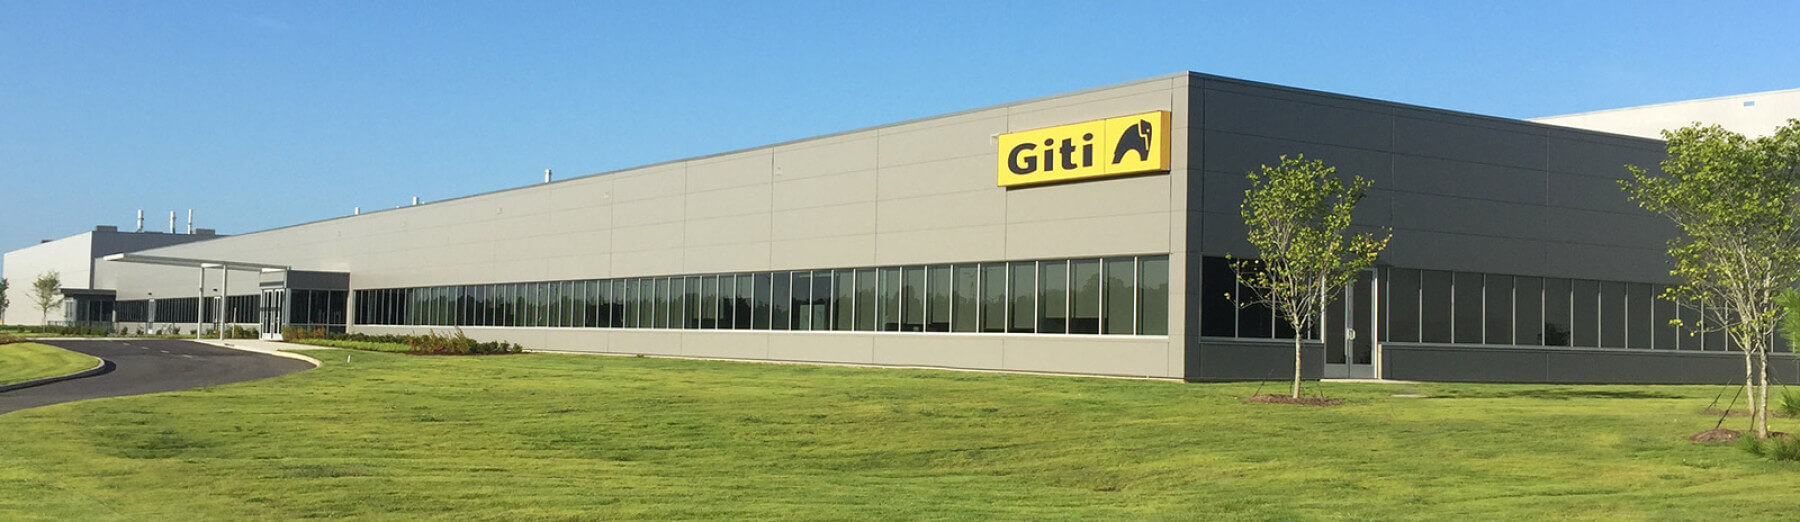 ground level view of completed plant, with Giti logo signage